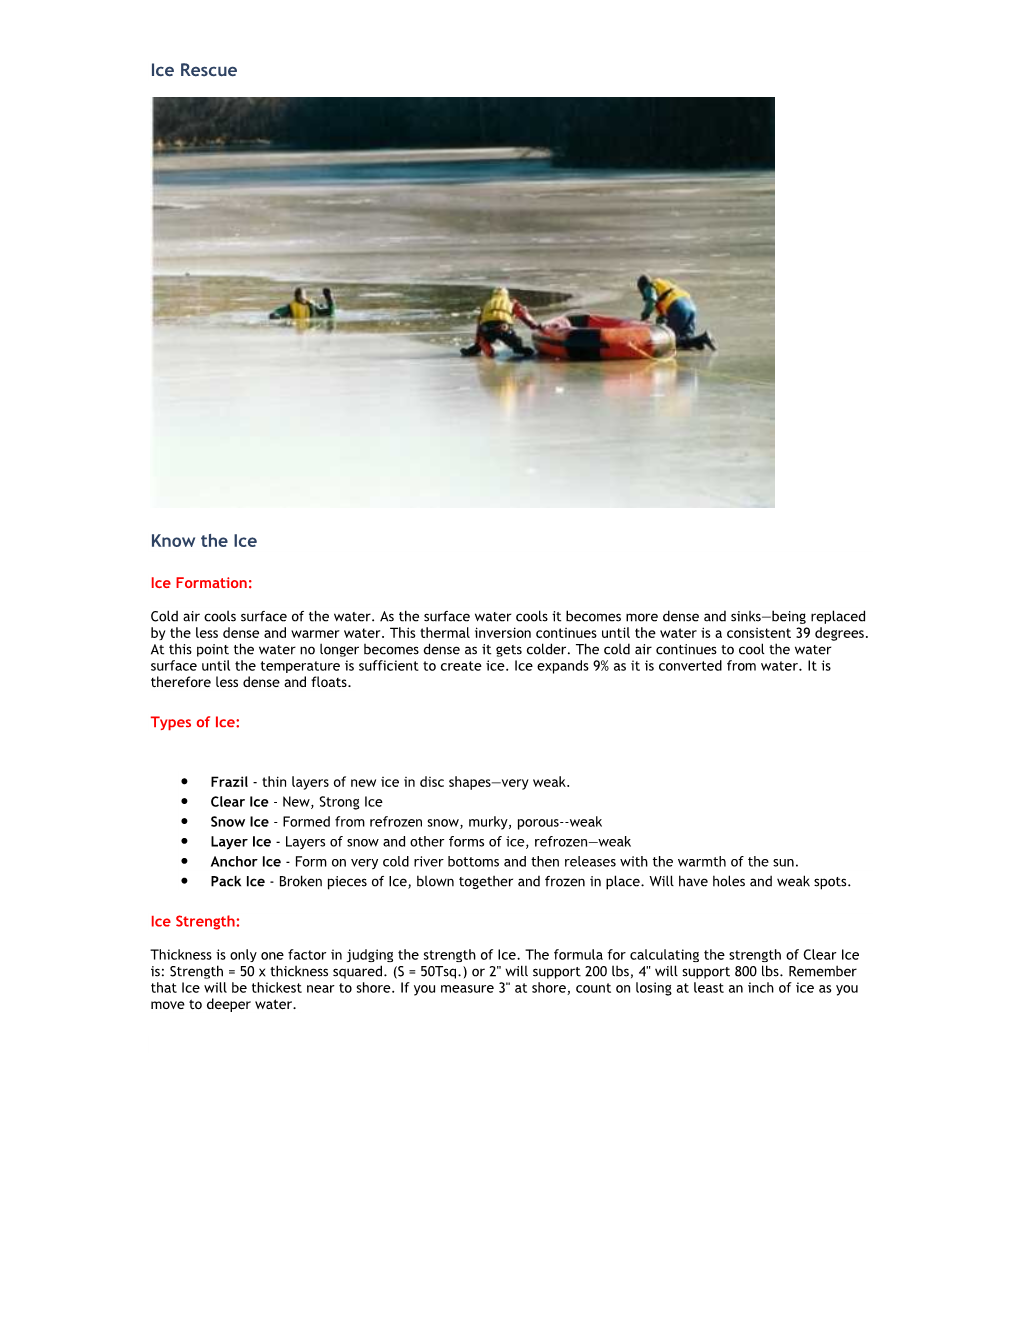 Water Rescue Ice Rescue Training